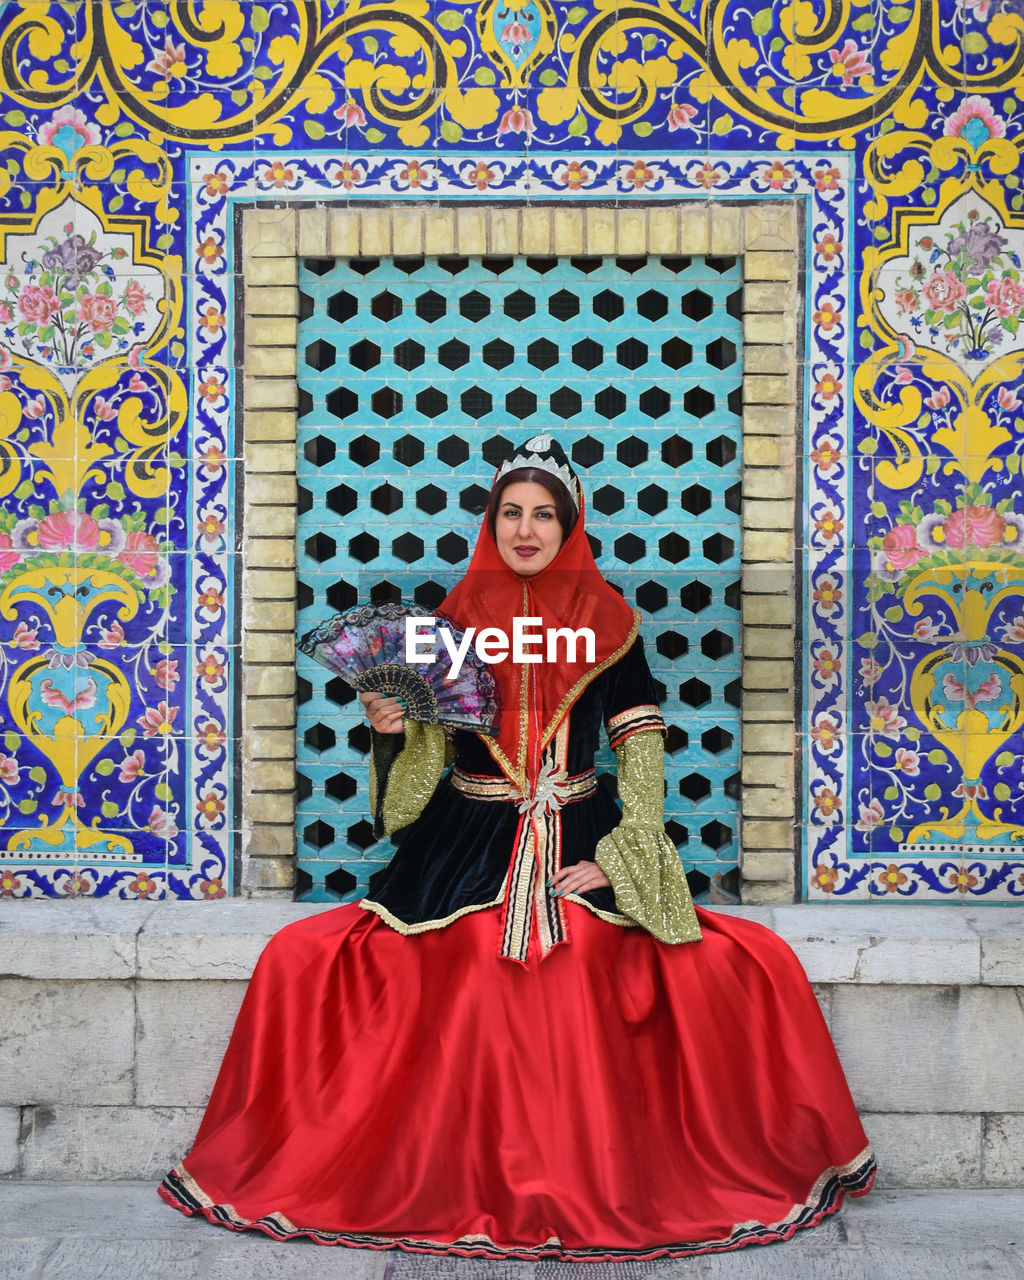 A beautiful girl in the clothes of iranian queens